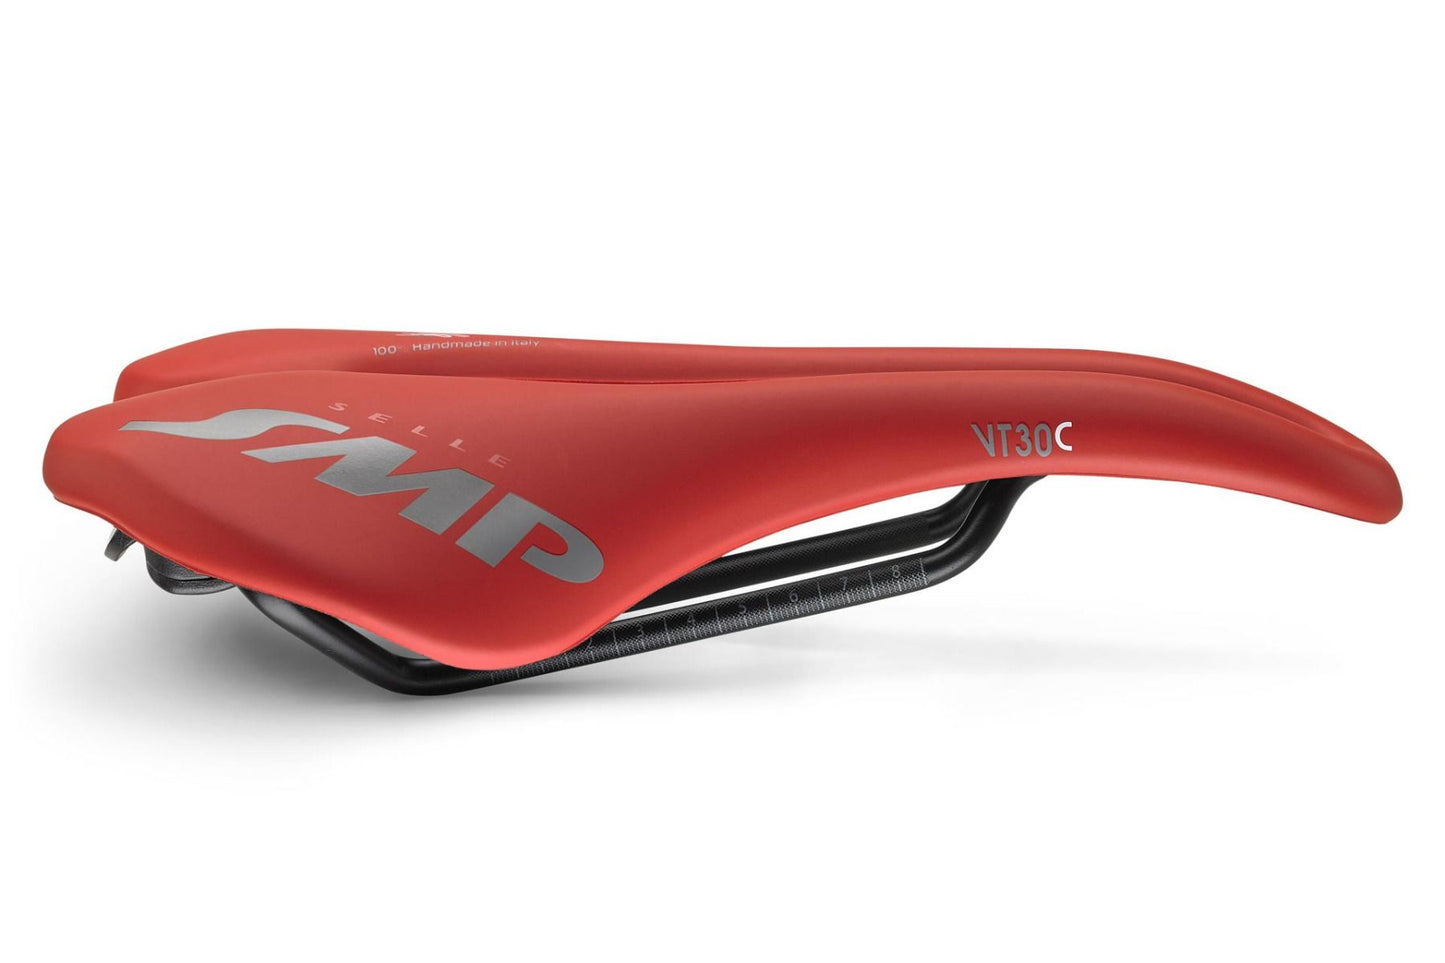 Selle SMP VT30C Saddle (Red)